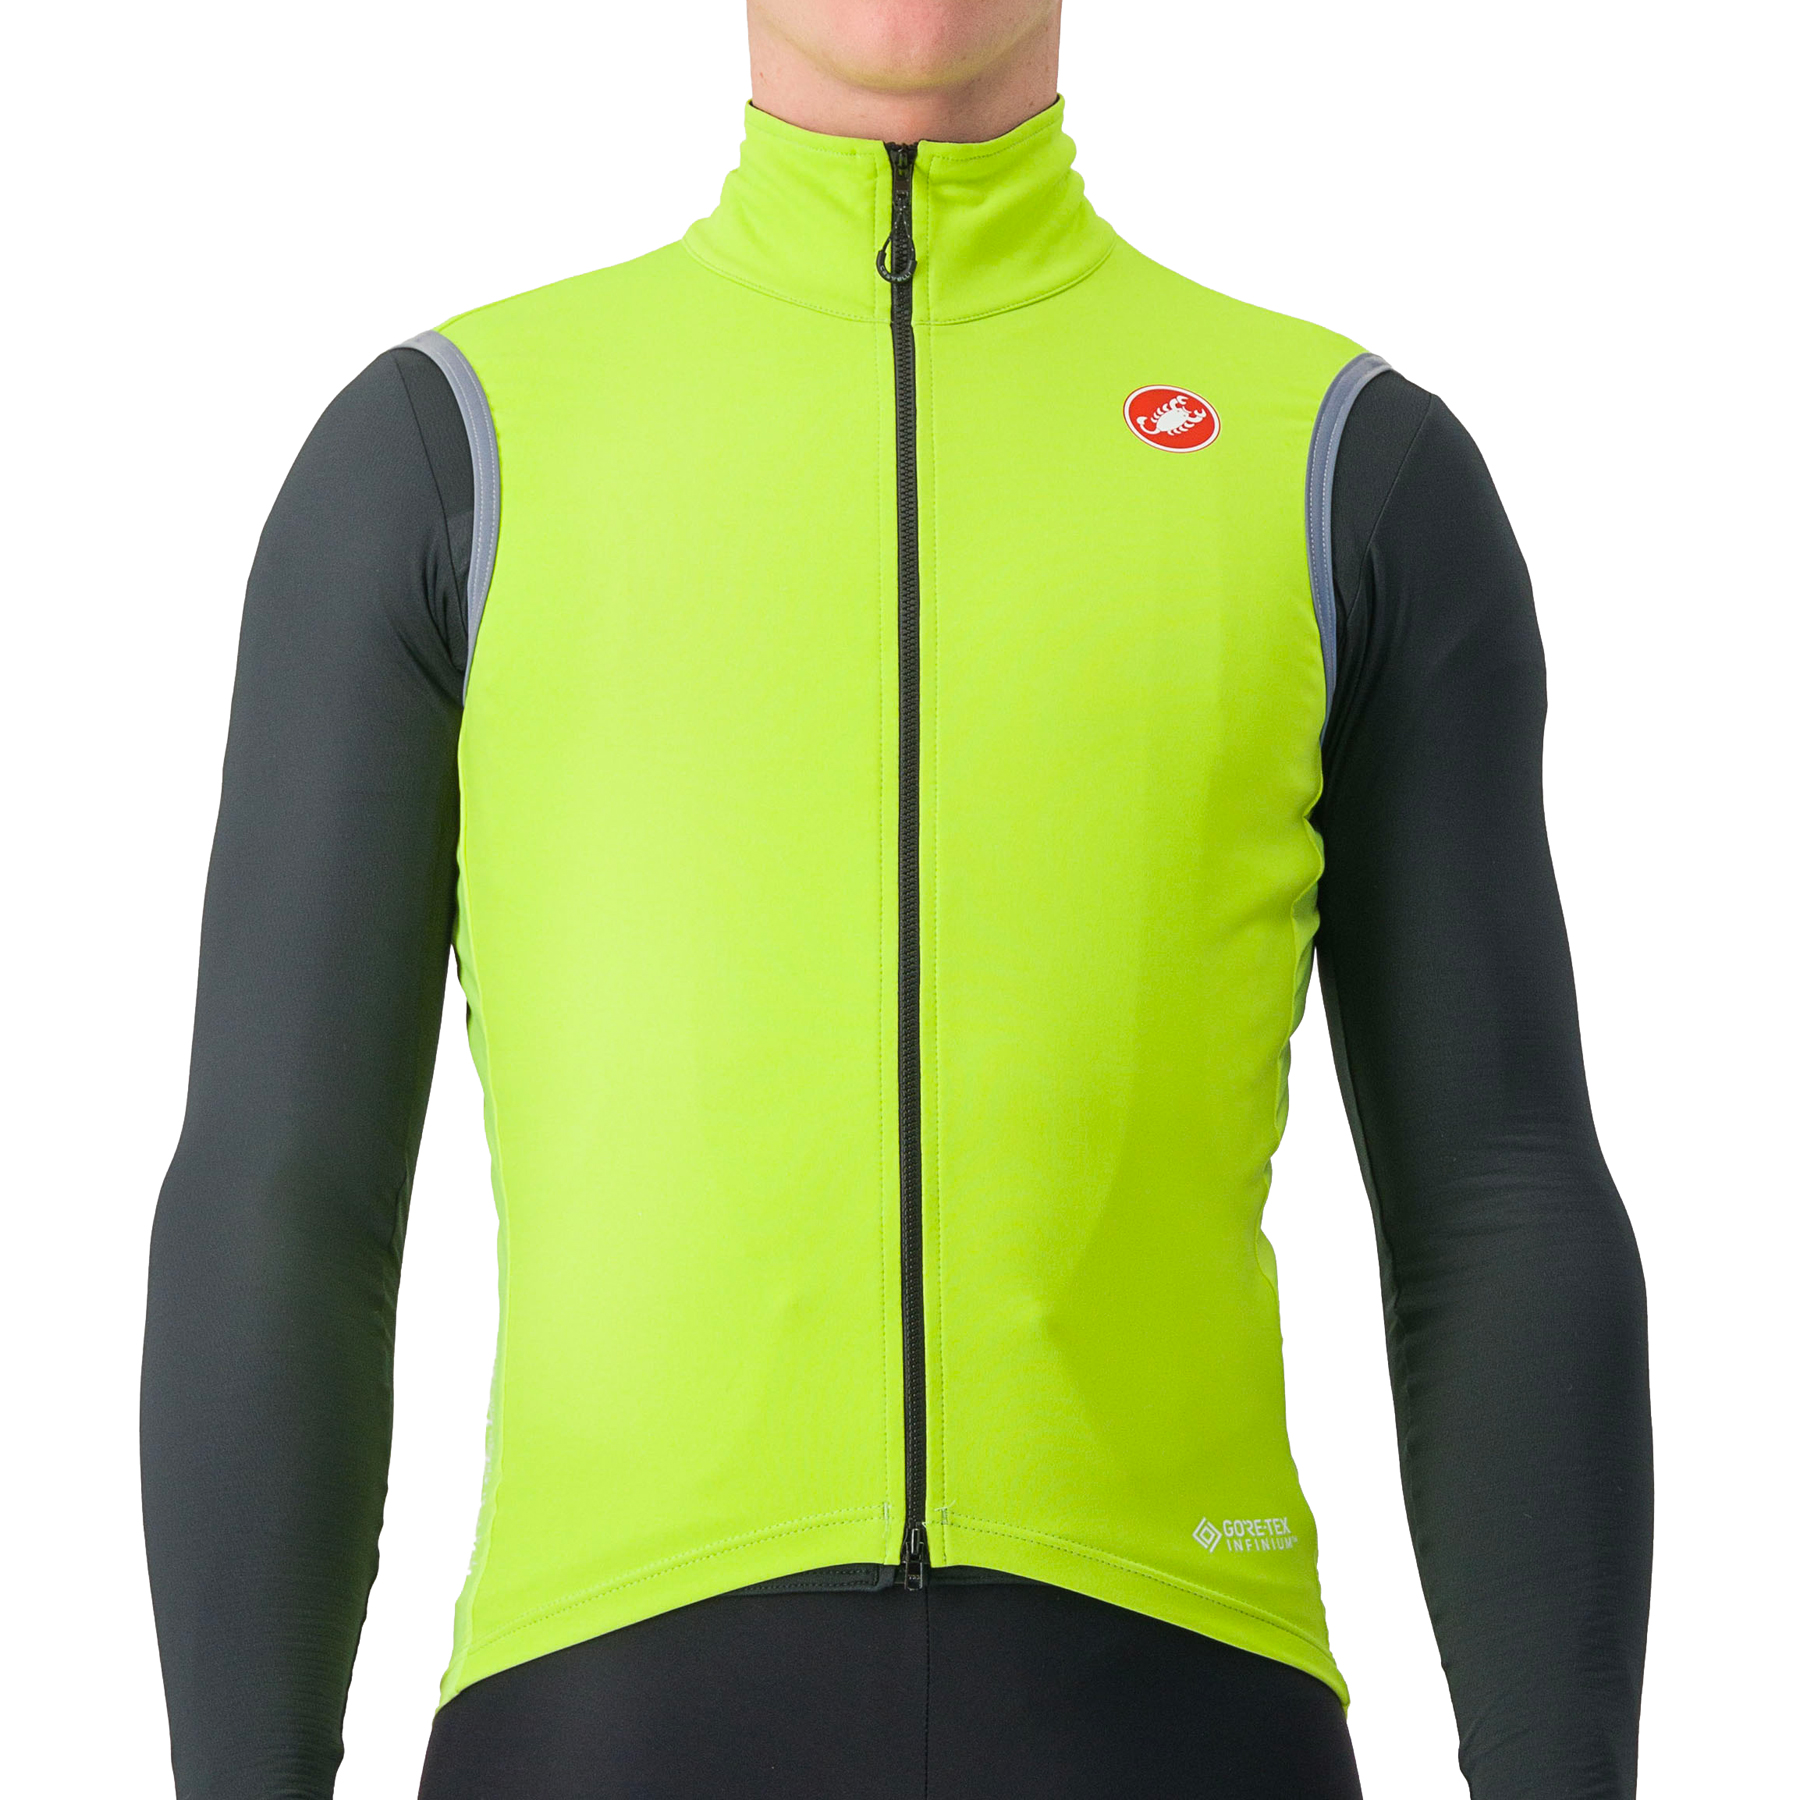 Image of Castelli Perfetto RoS 2 Vest - electric lime 383